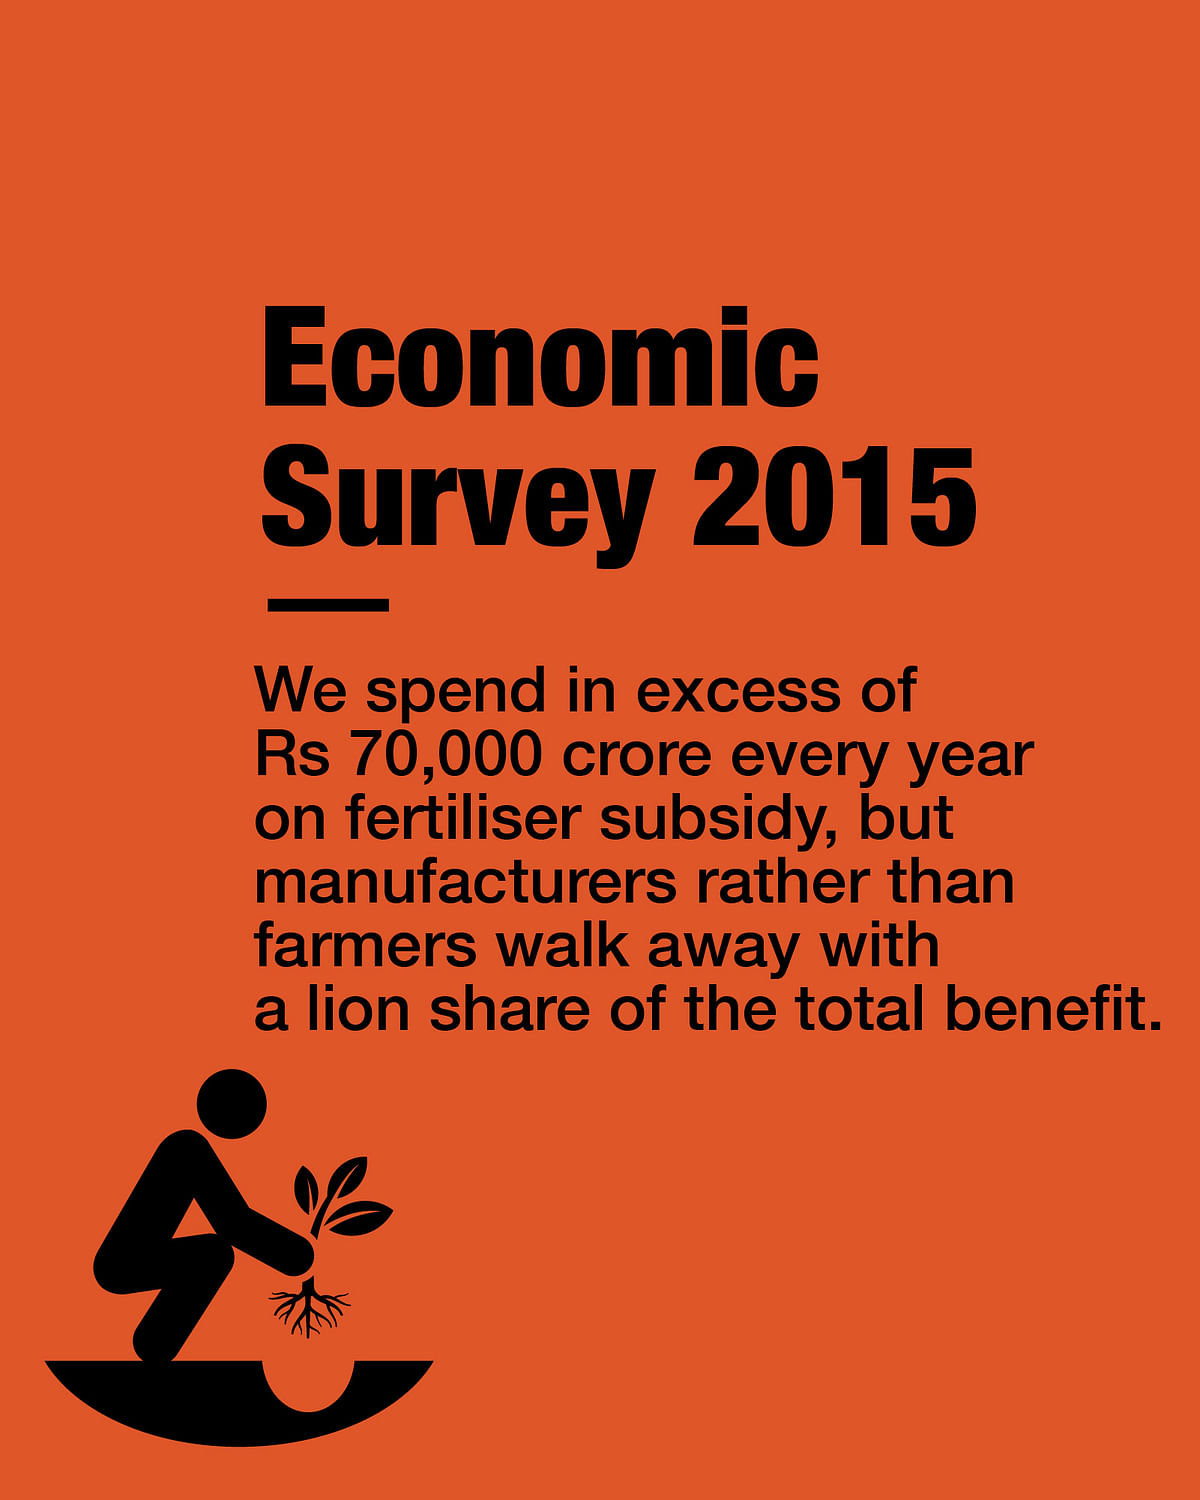 The Economic Survey 2014-15 found that “a rich household benefits more from the subsidy than a poor household.”